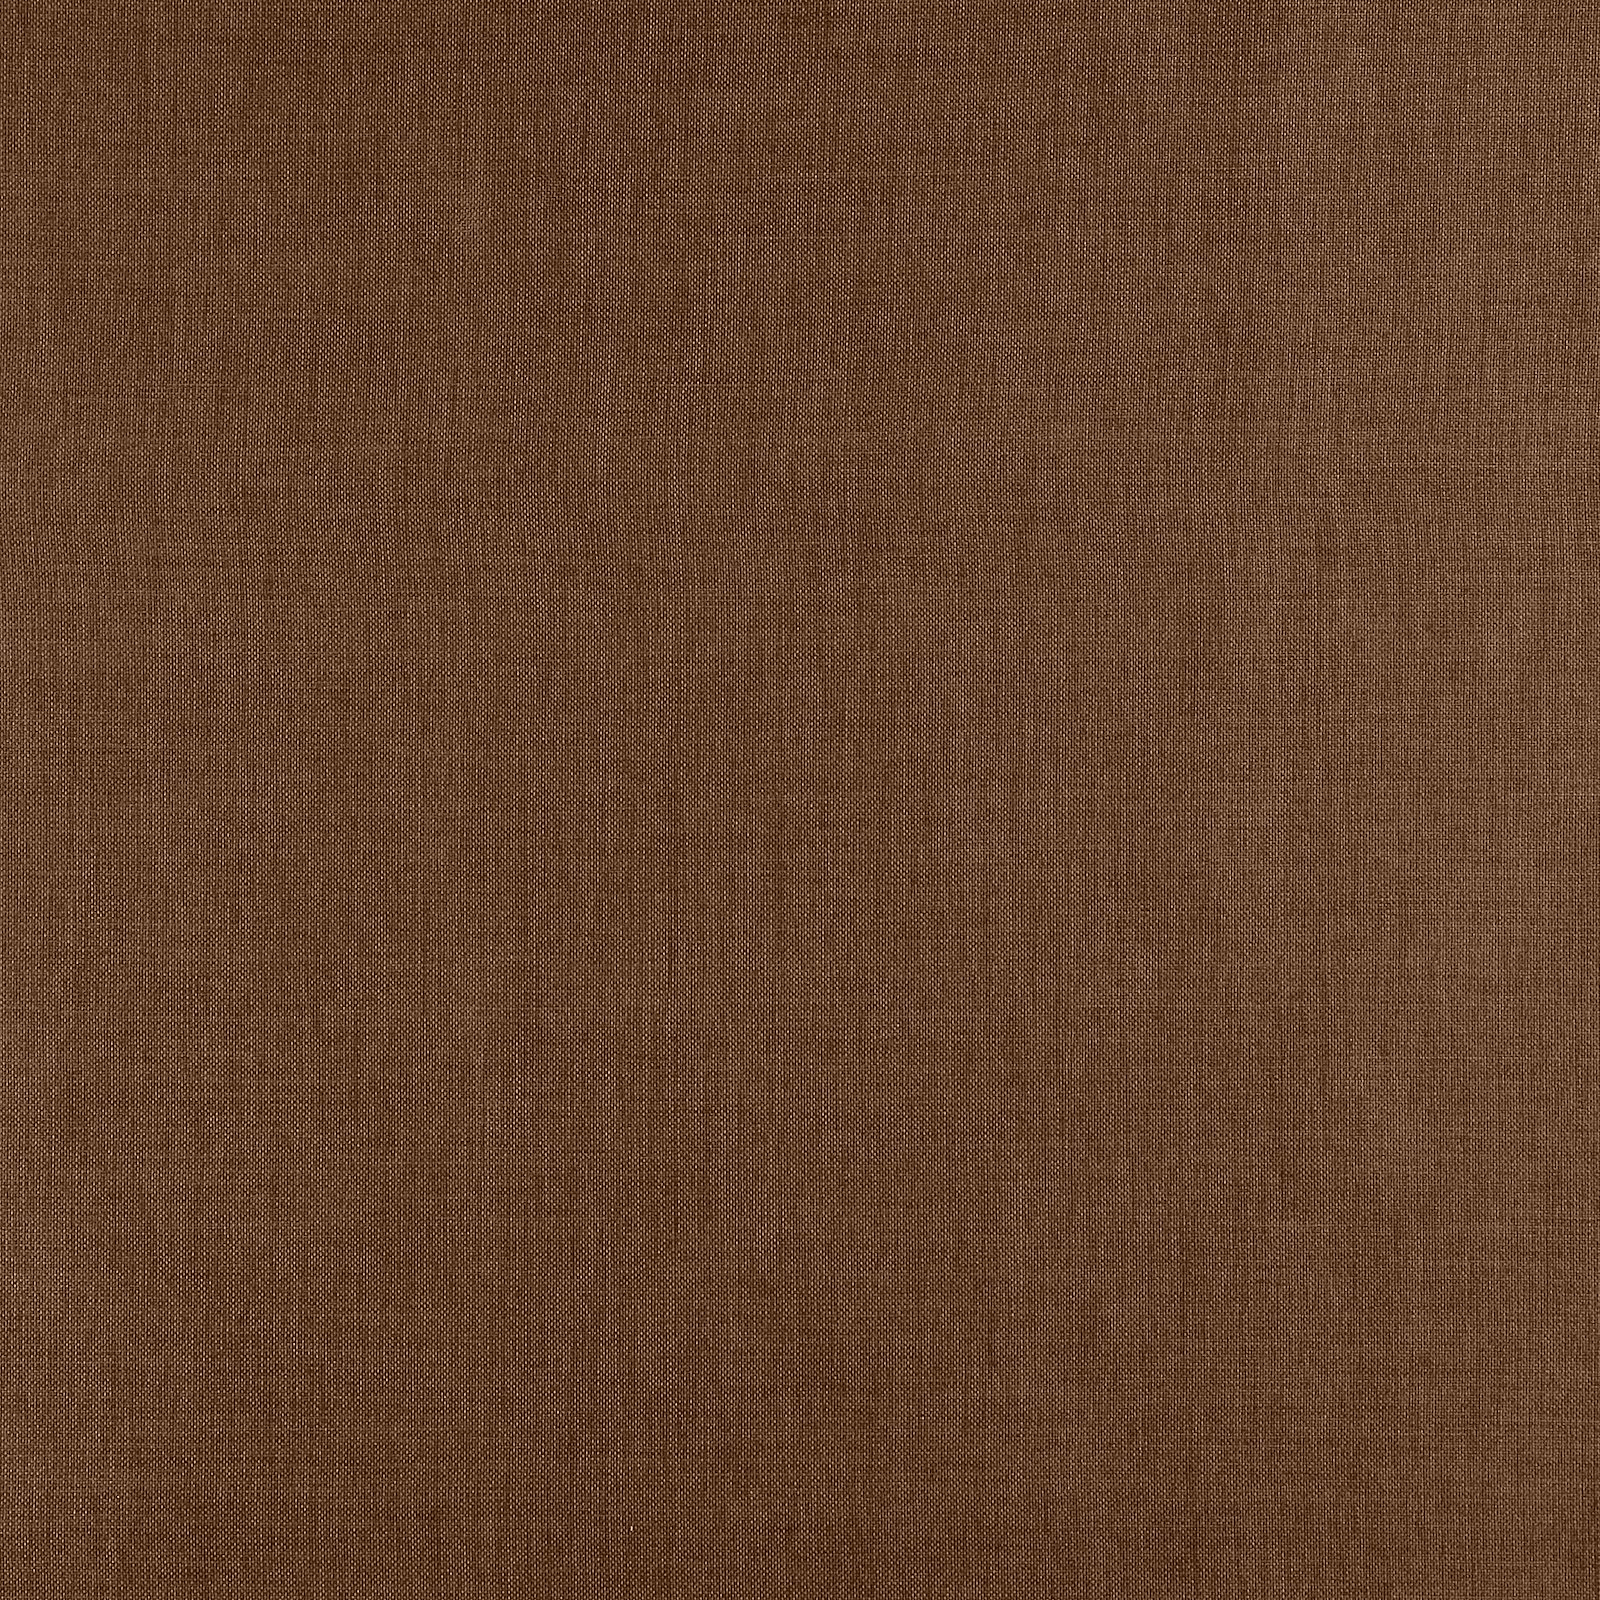 Upholstery fabric light dusty chestnut 826251_pack_solid